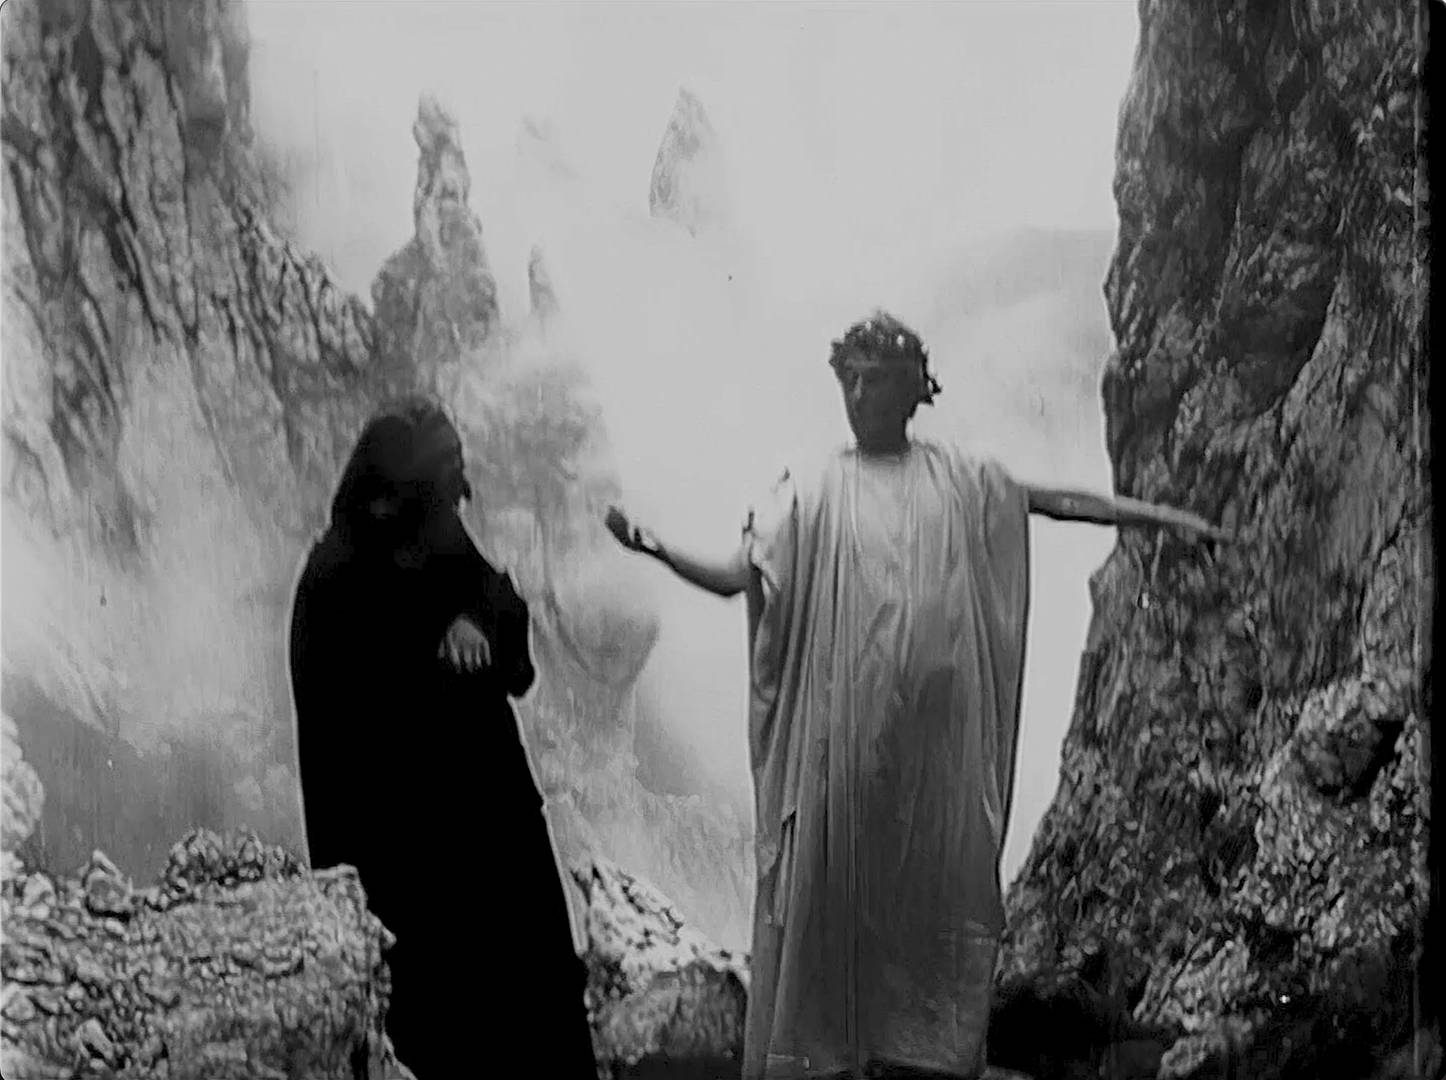 Dante's Inferno (1911) blu-ray with slipcover